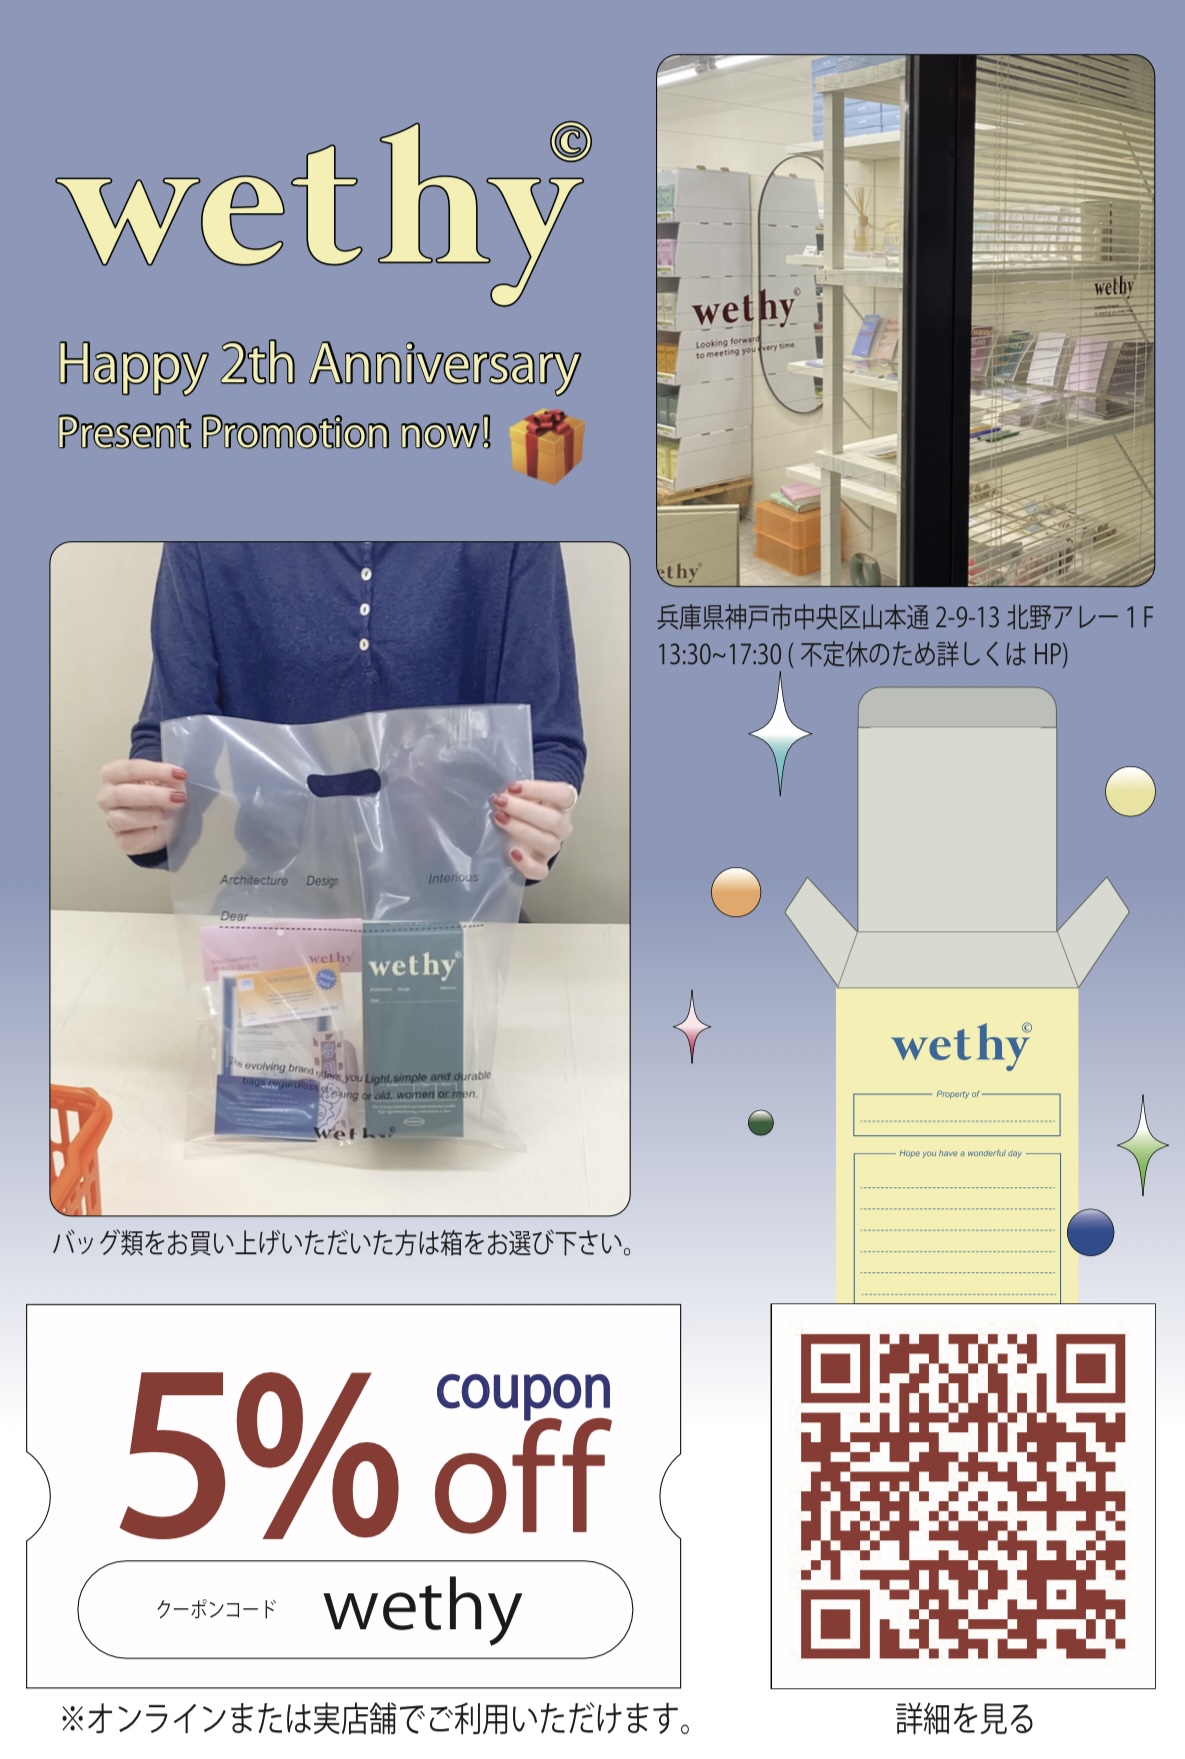 2th Anniversary coupon ５％ OFF